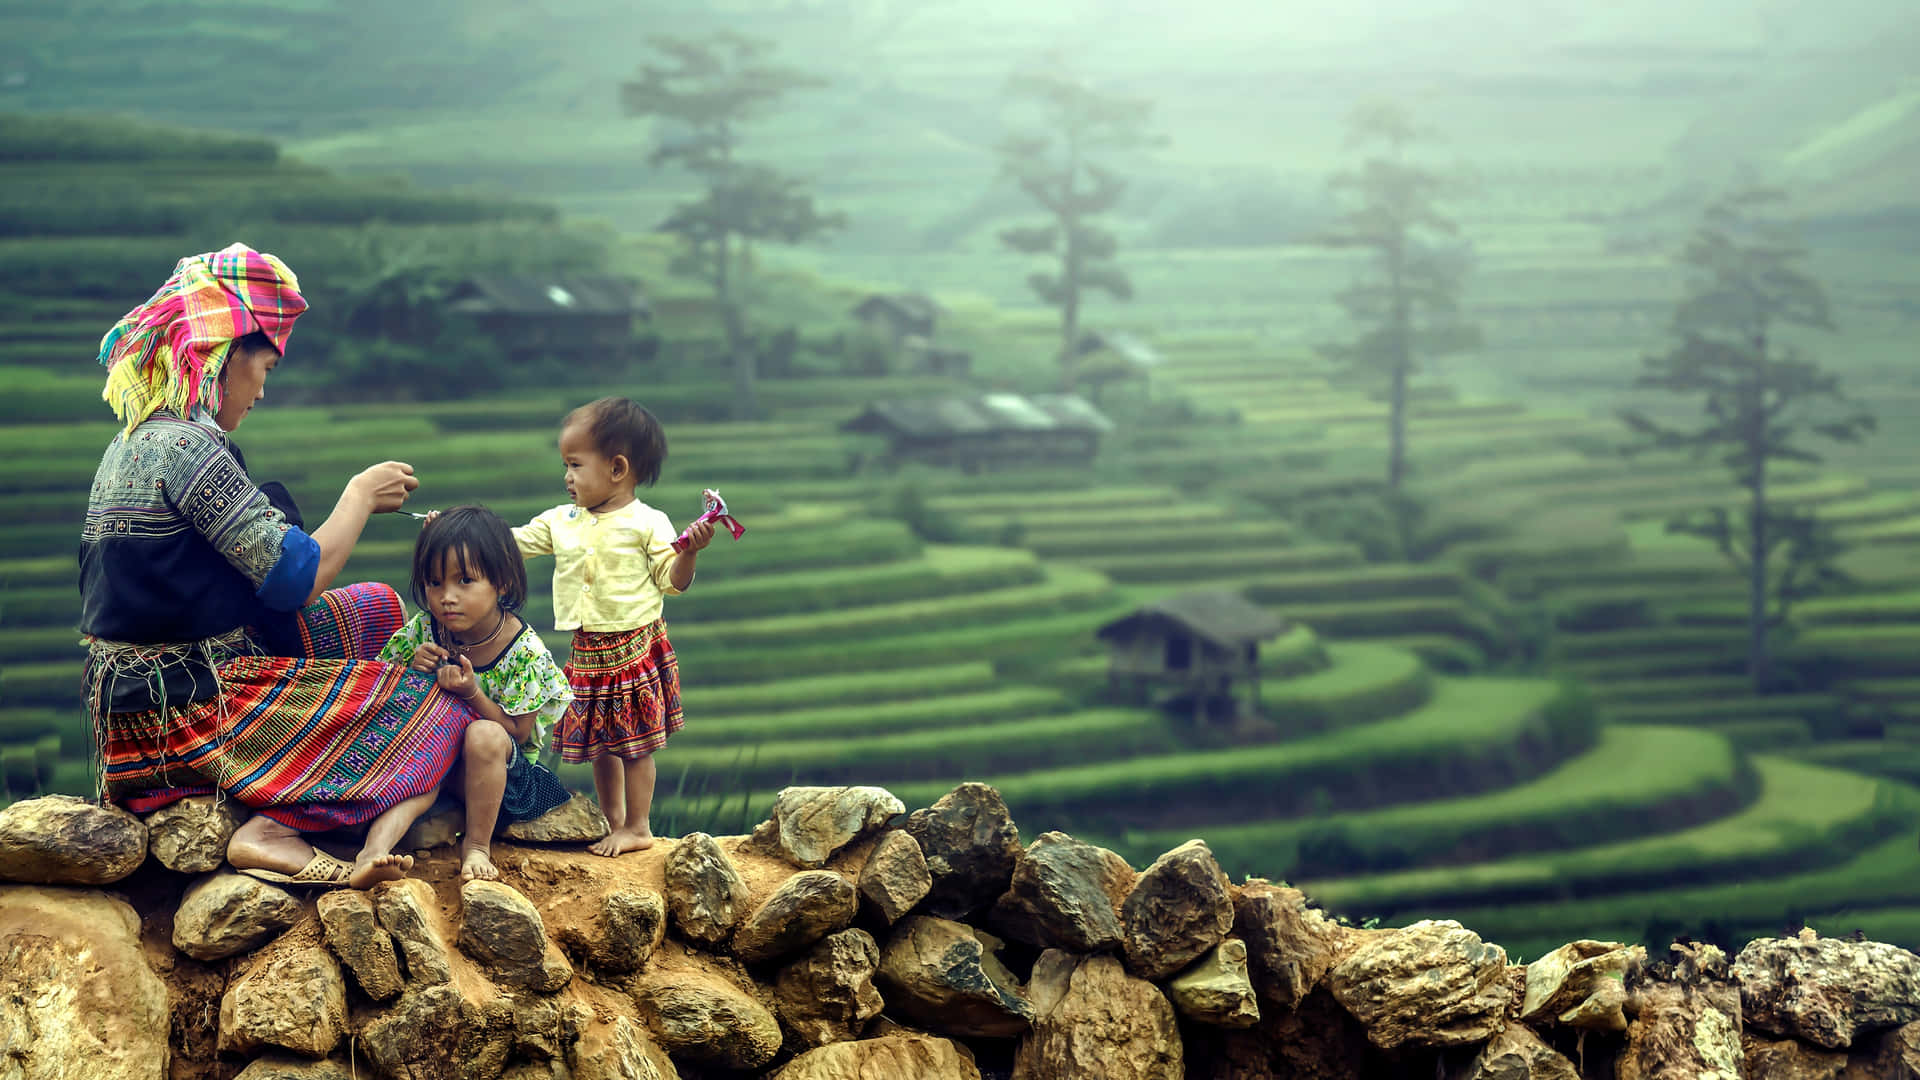 Mother and Children amidst Banaue Rice Terraces Wallpaper